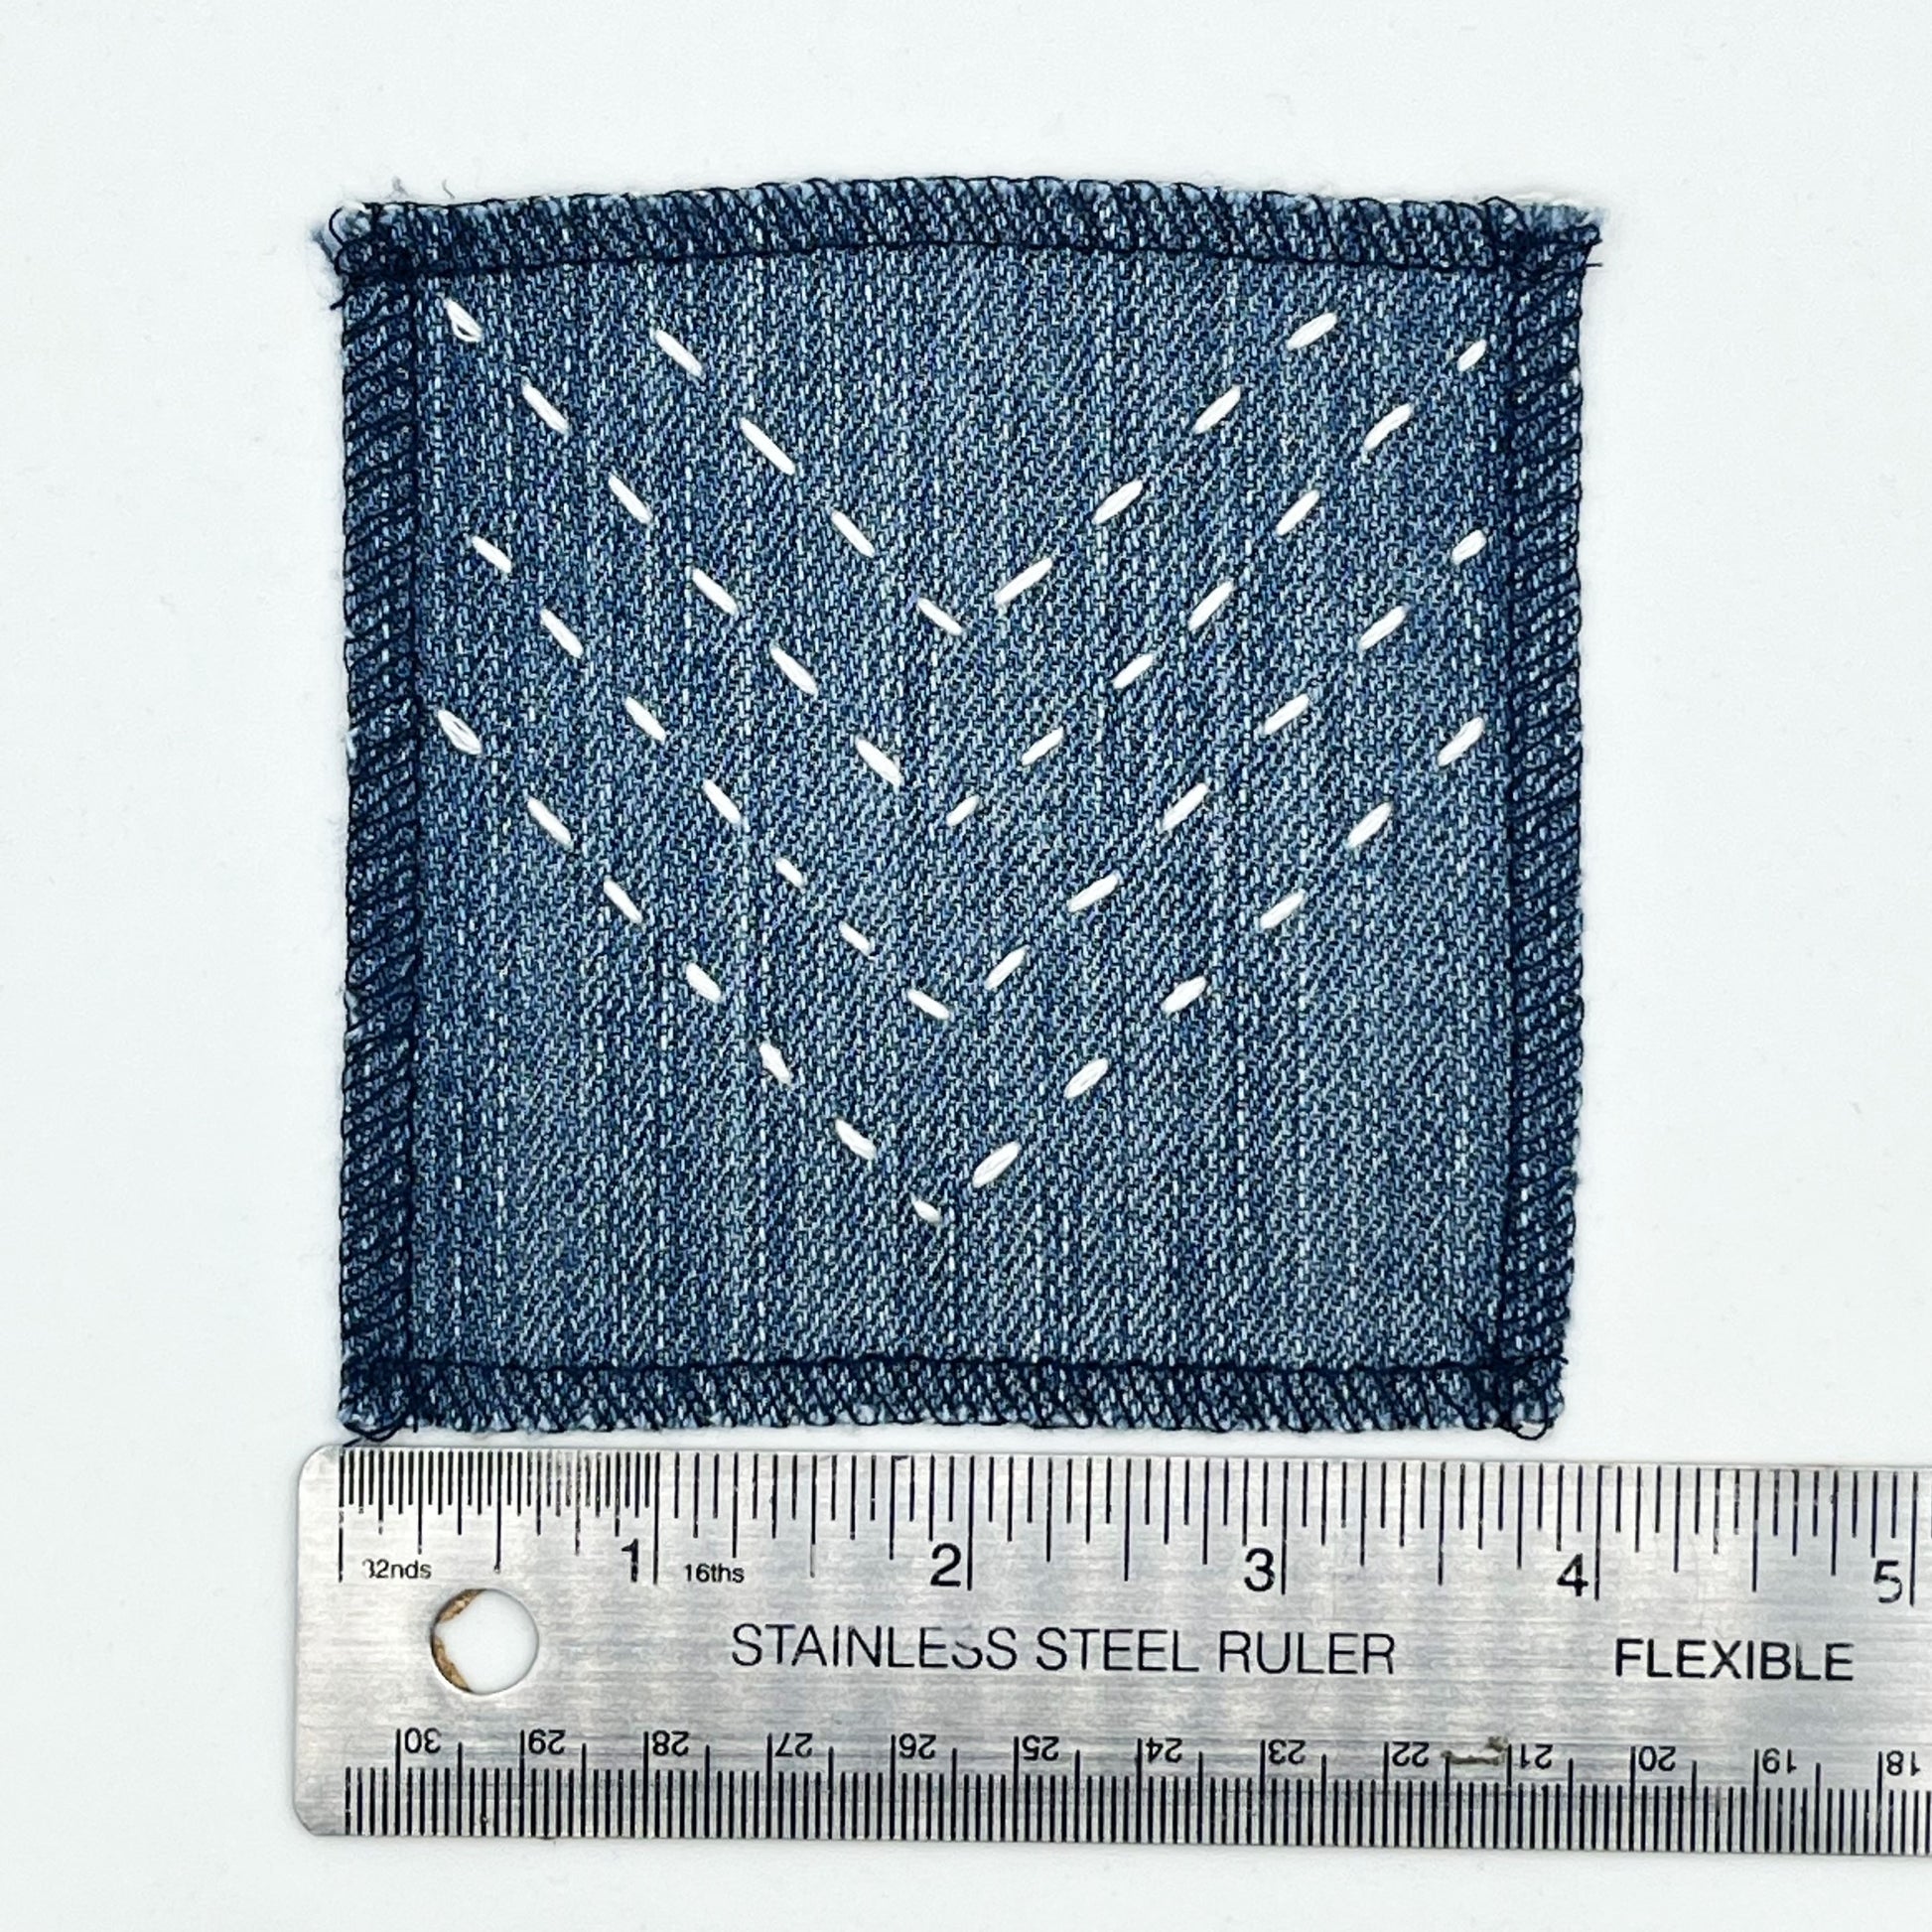 a square patch made out of denim, handstitched with rows of ivory running stitches in a chevron pattern, with overlocked edges, next to a metal ruler showing a width of 4 inches, on a white background